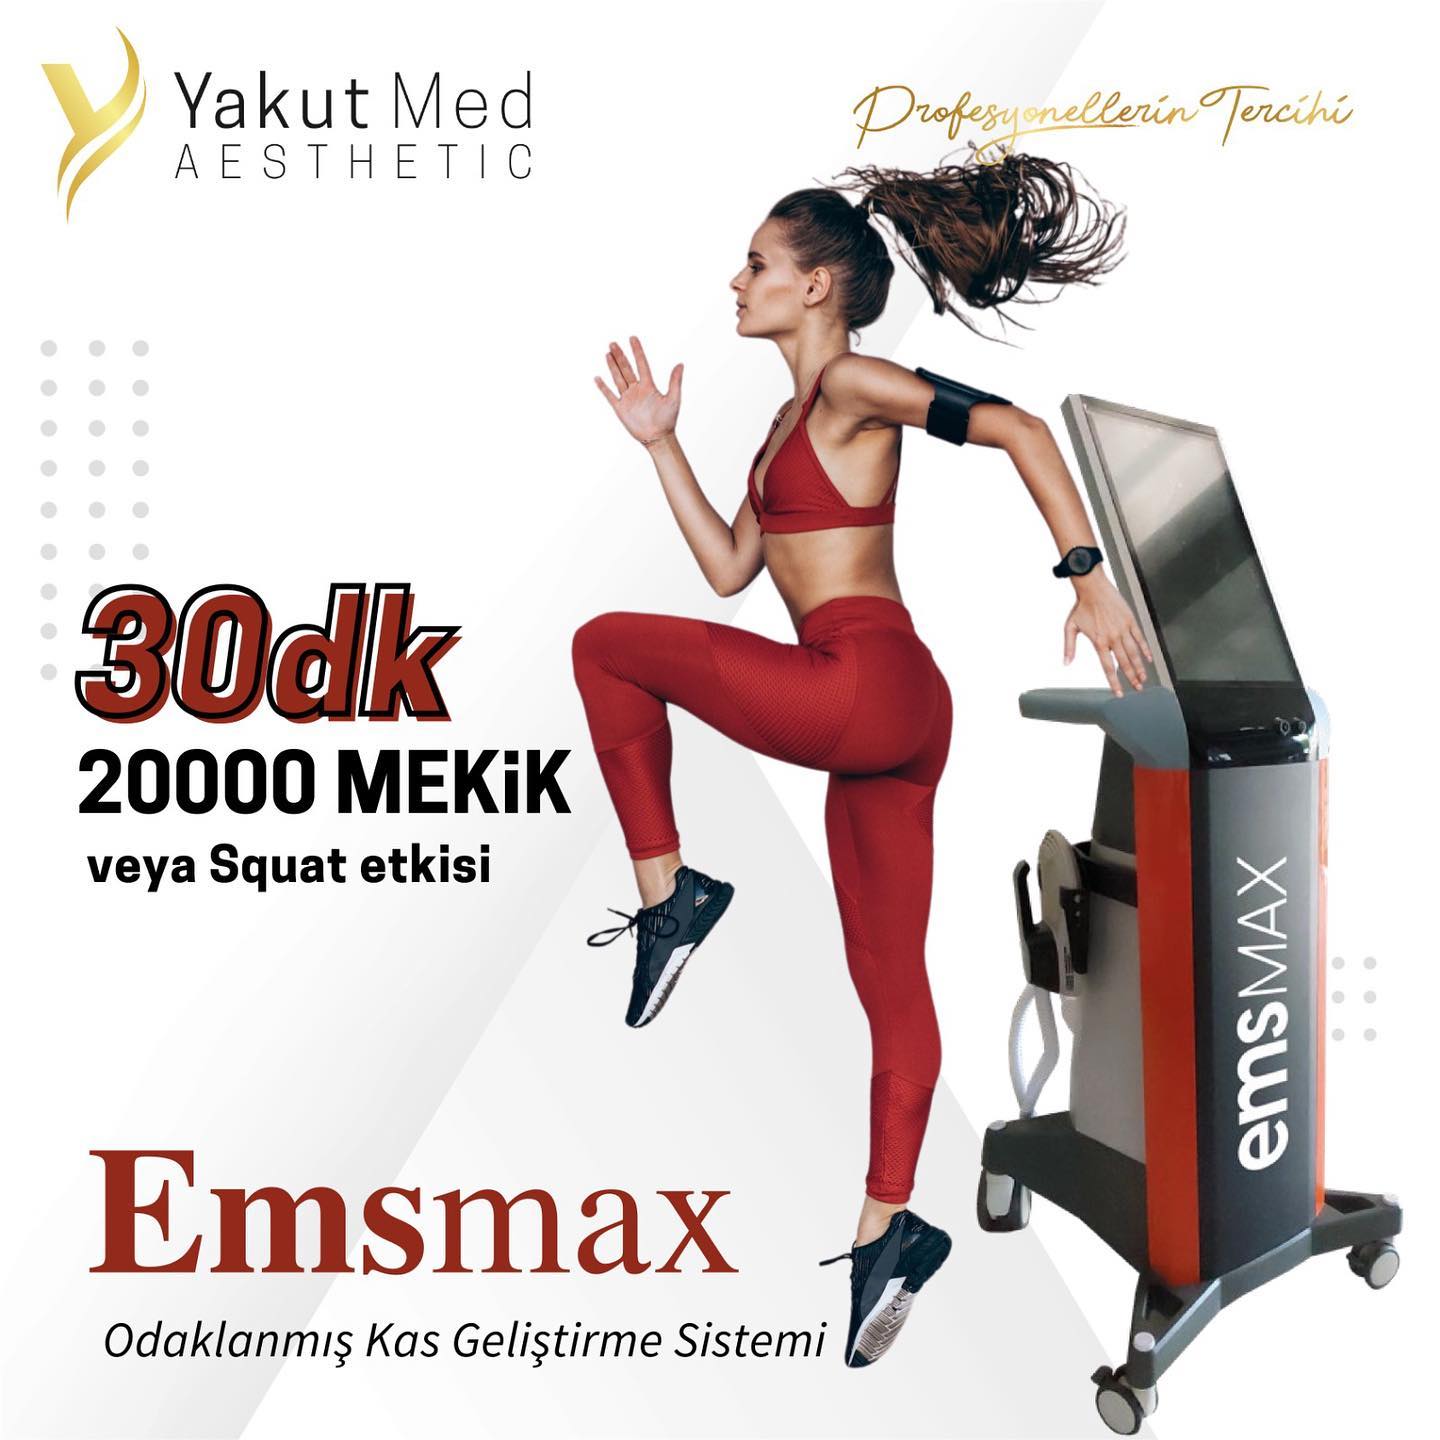 With the assurance of EMSMAX Yakut Med